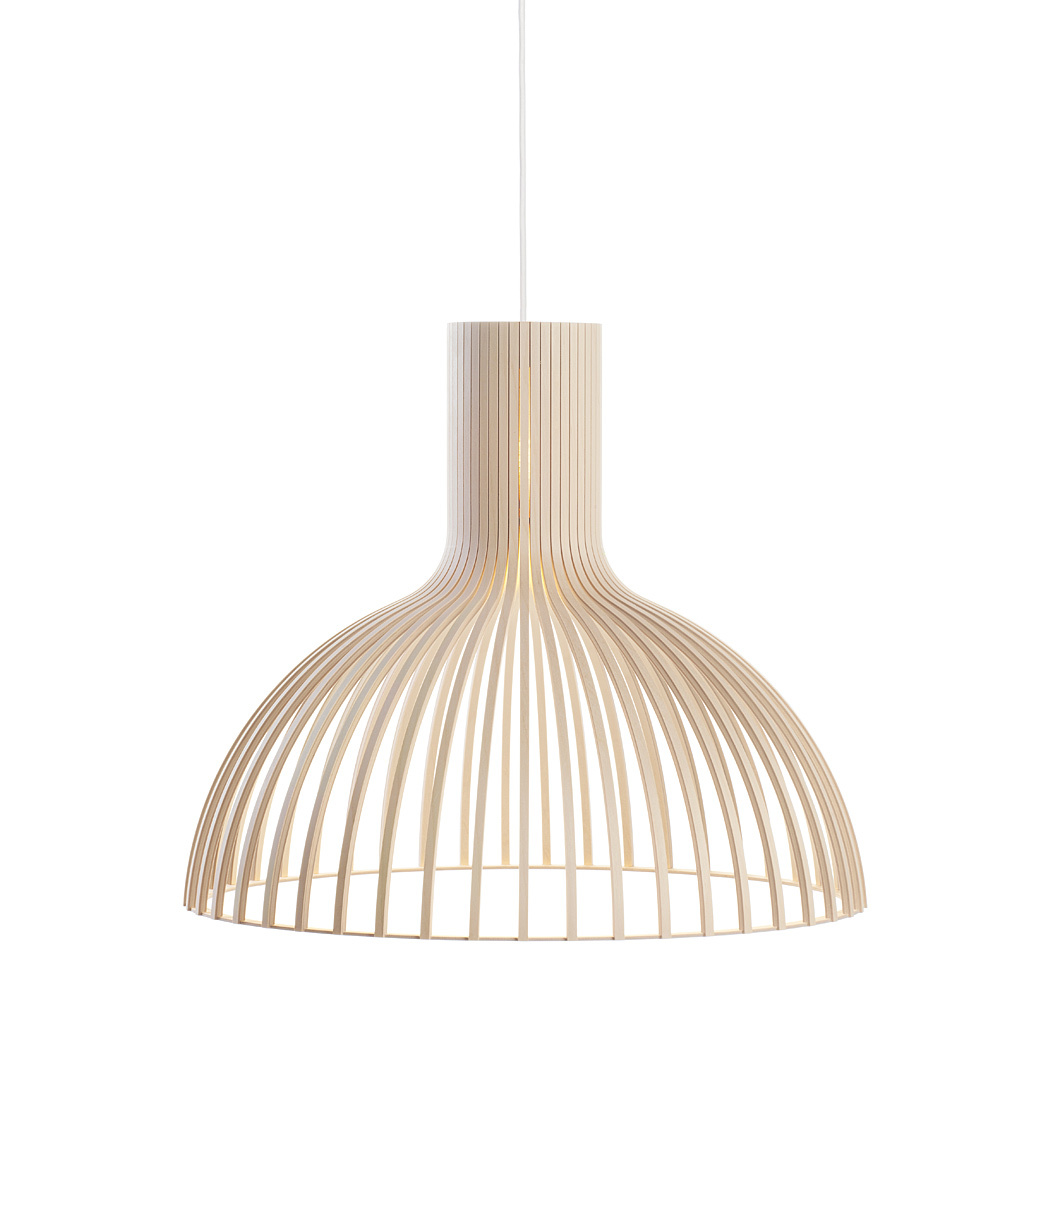 Victo 4250 pendant lamp is available in natural birch